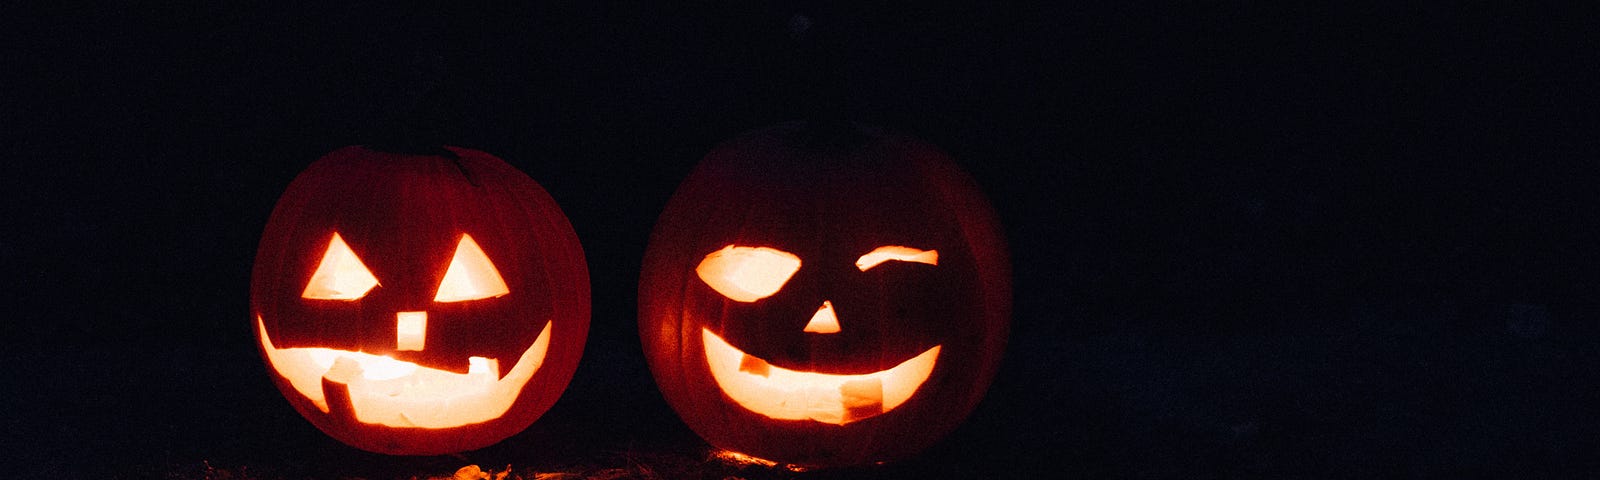 An image of two jack-o-lanterns (pumpkins with faces carved into them) in the dark lit up.